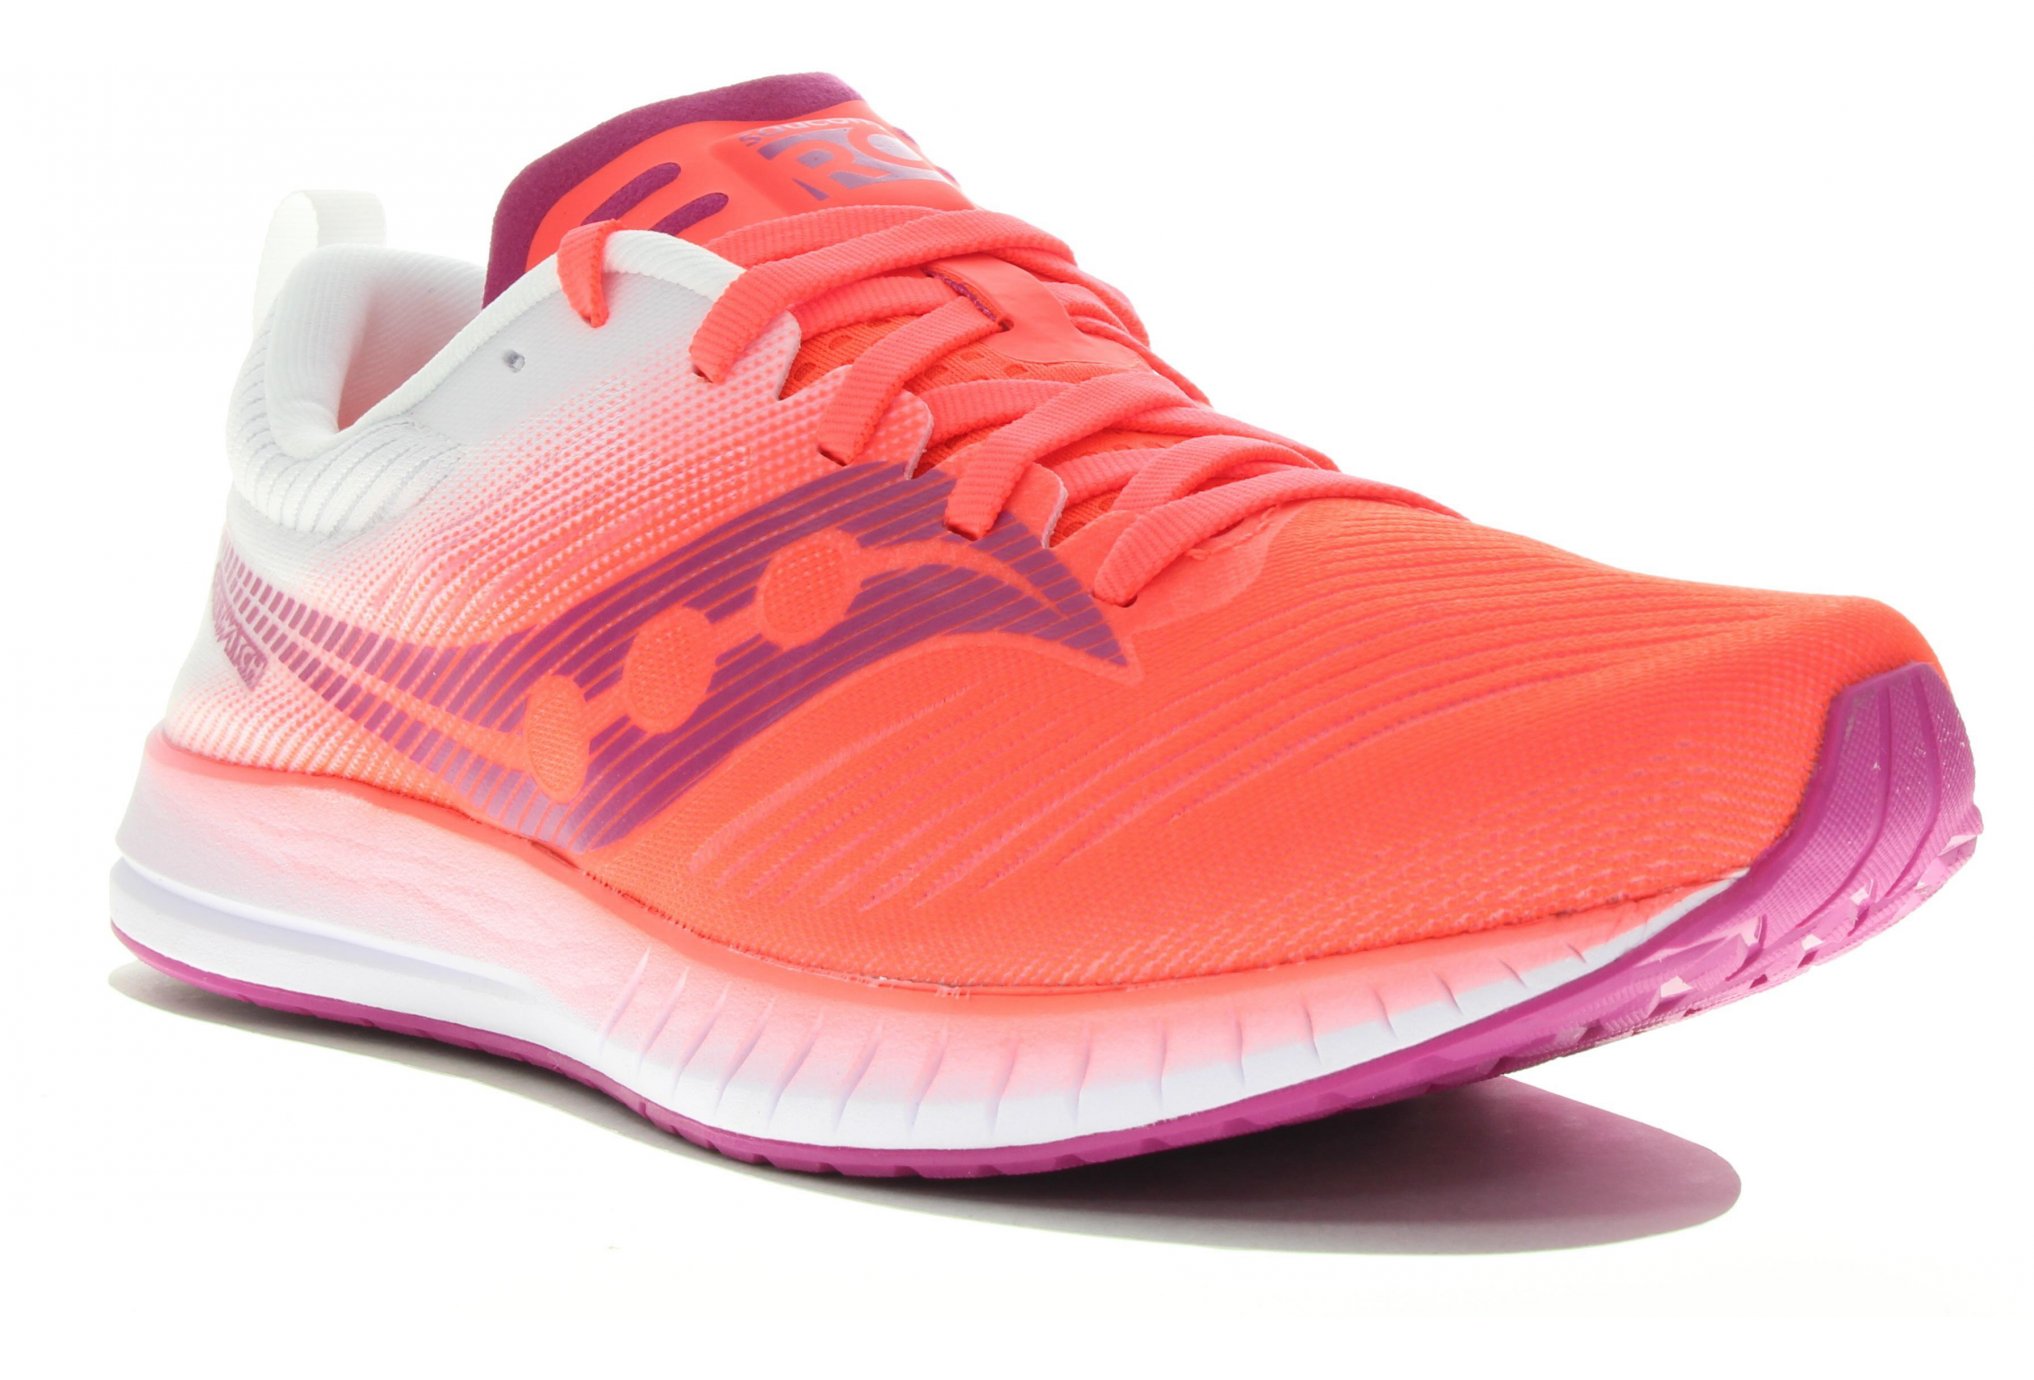 saucony fastwitch 6 mujer baratas